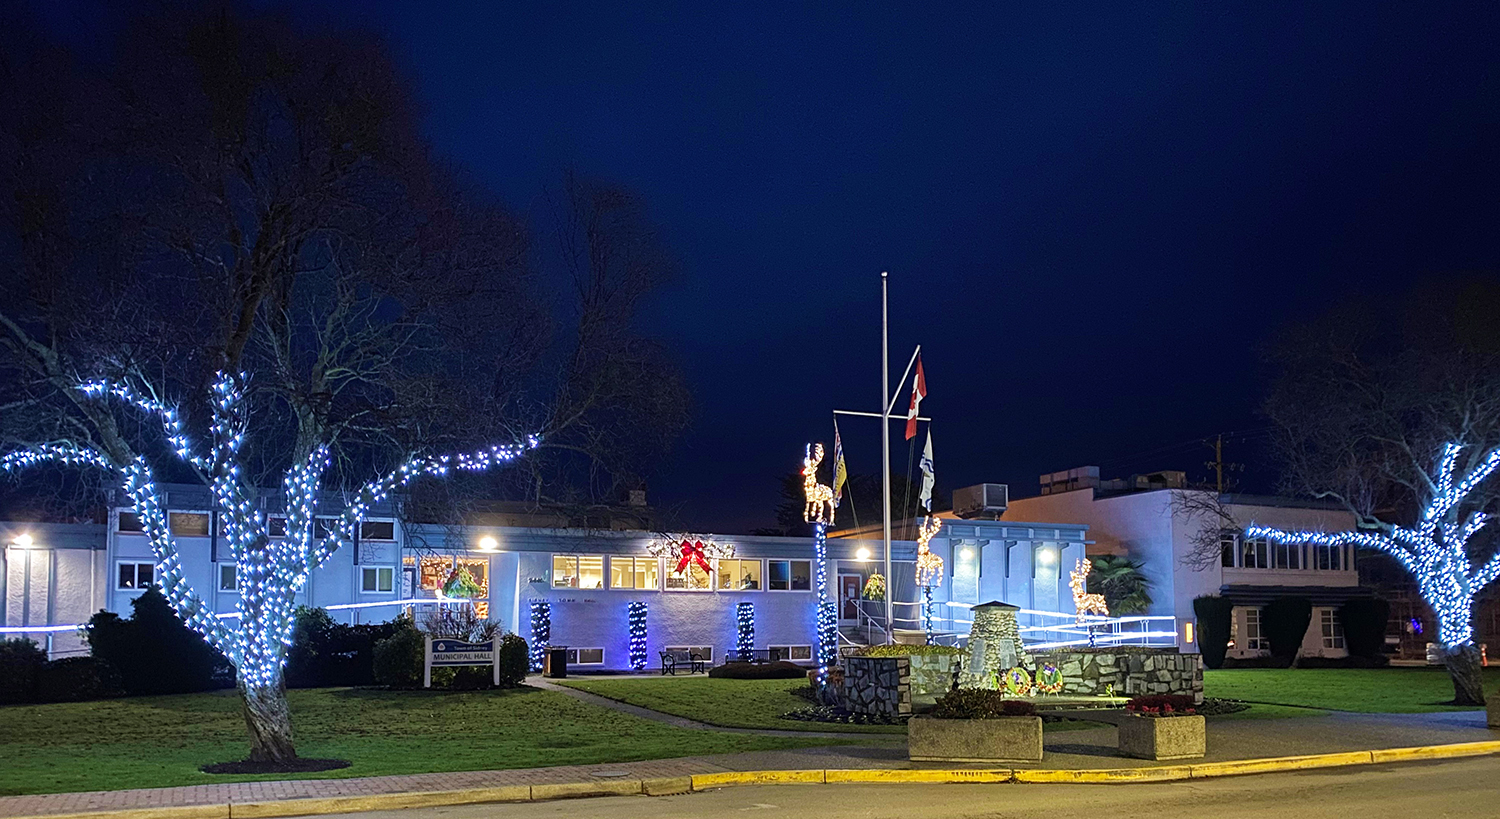 Image of the Sidney Municipal Hall building at night with Christmas lights on the trees out front and three light up reindeer on the lawn behind the cenotaph